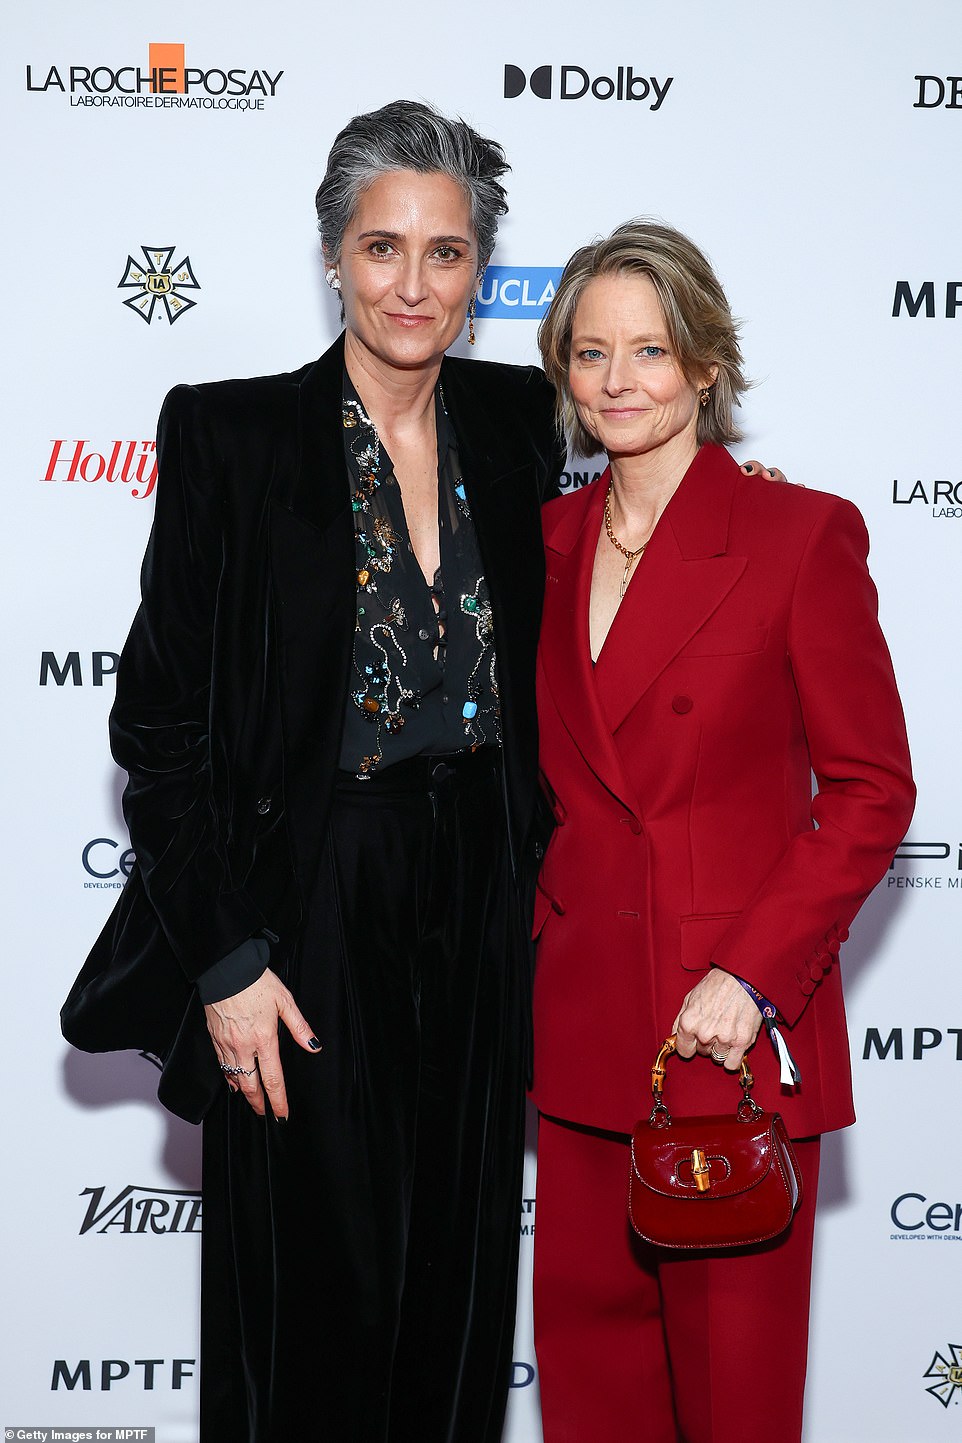 Jodie Foster wore a red suit as she clutched a small red handbag as she posed with partner Alexandra Hedison, who opted for a black outfit with black nails